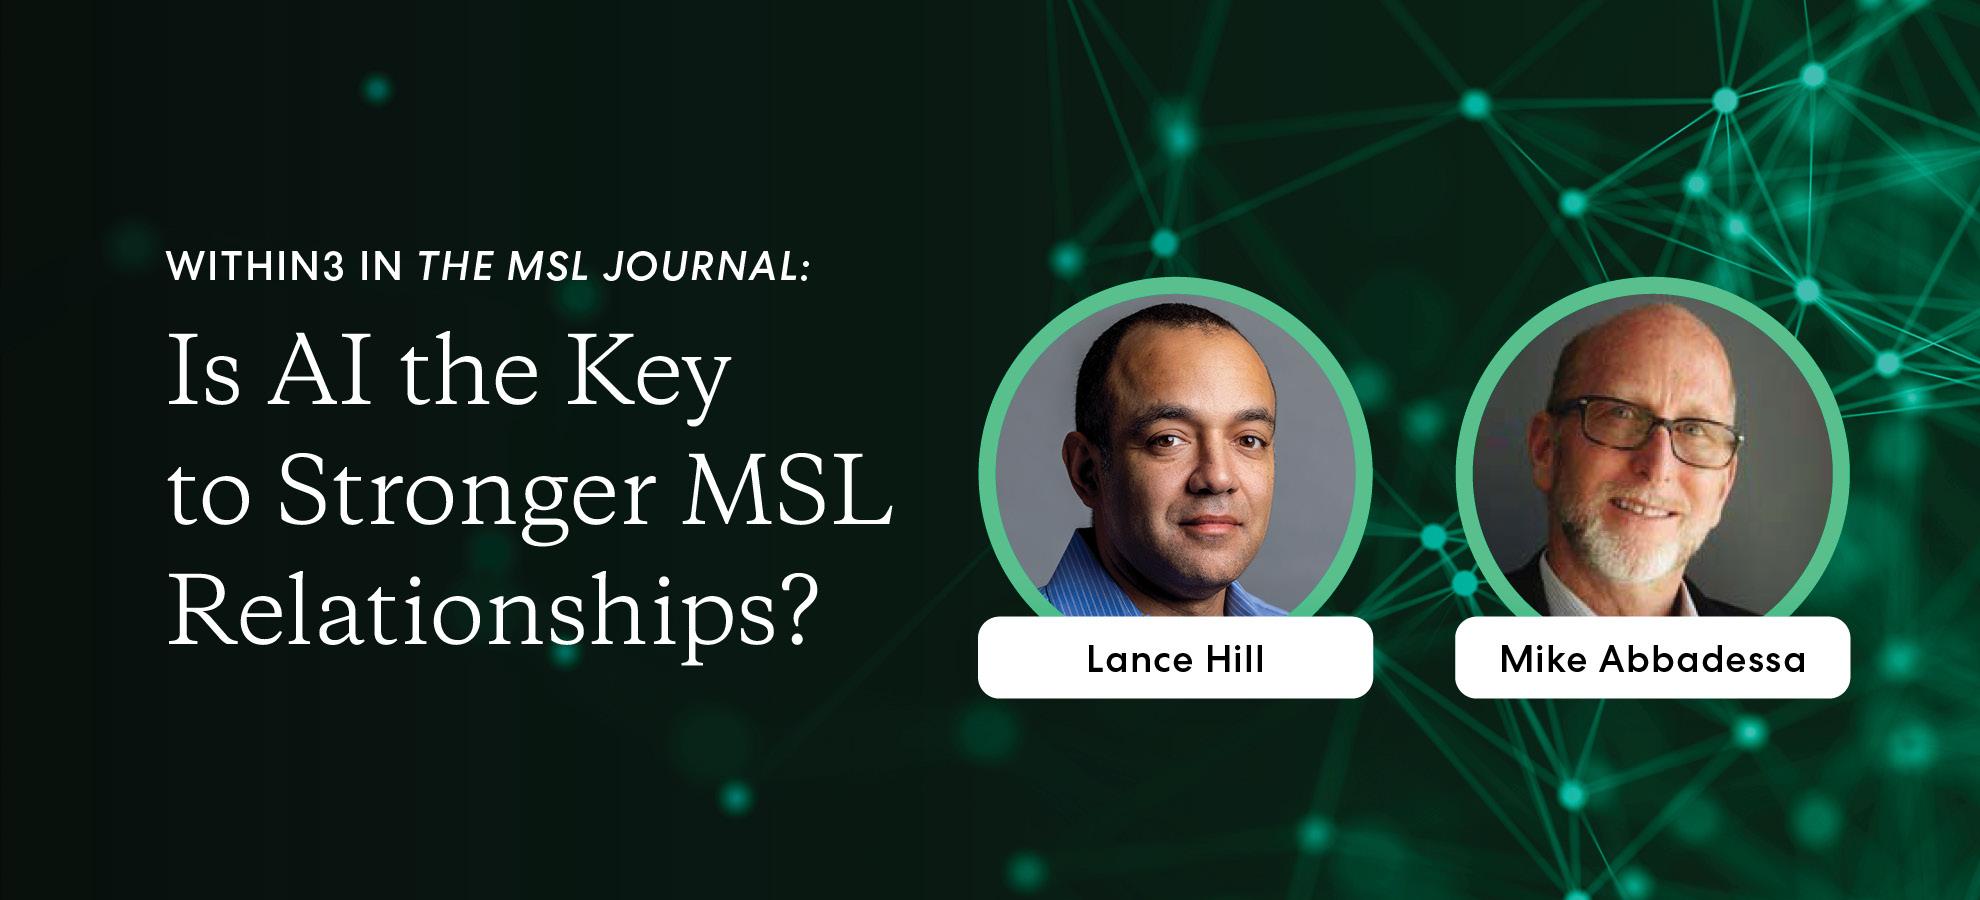 Within3 in the MSL Journal: Is AI the Key to Stronger MSL Relationships?